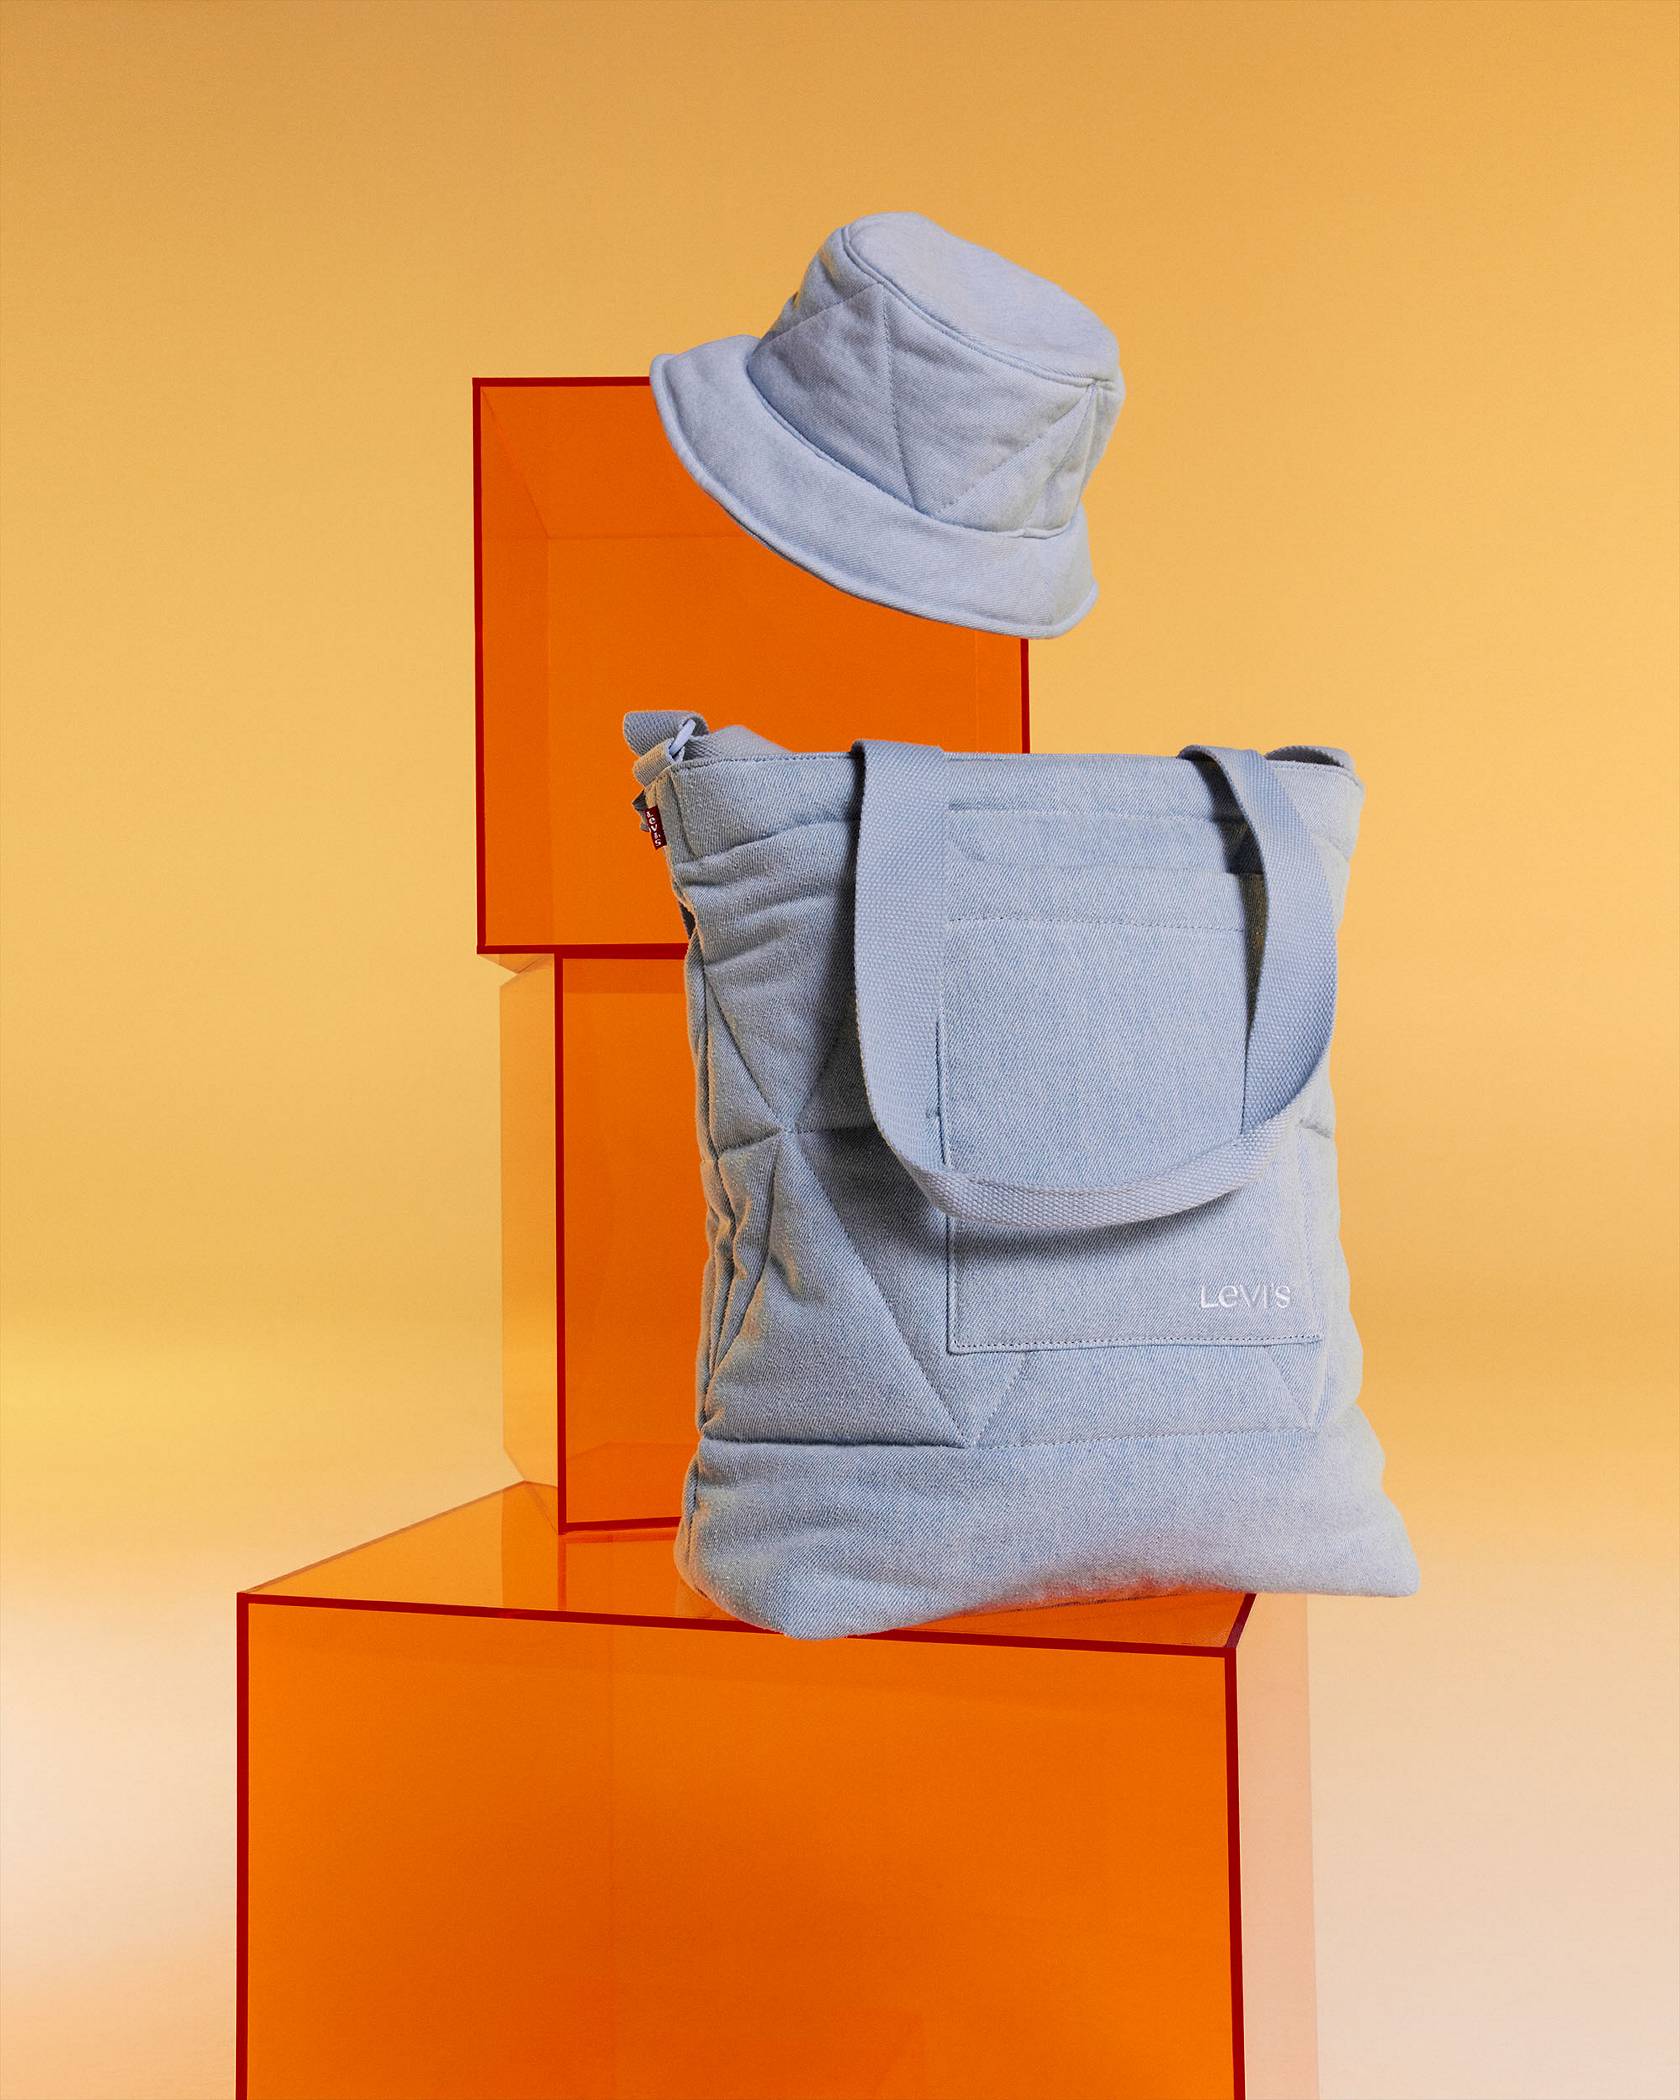 Denim accessories on orange acrylic boxes against a yellow background